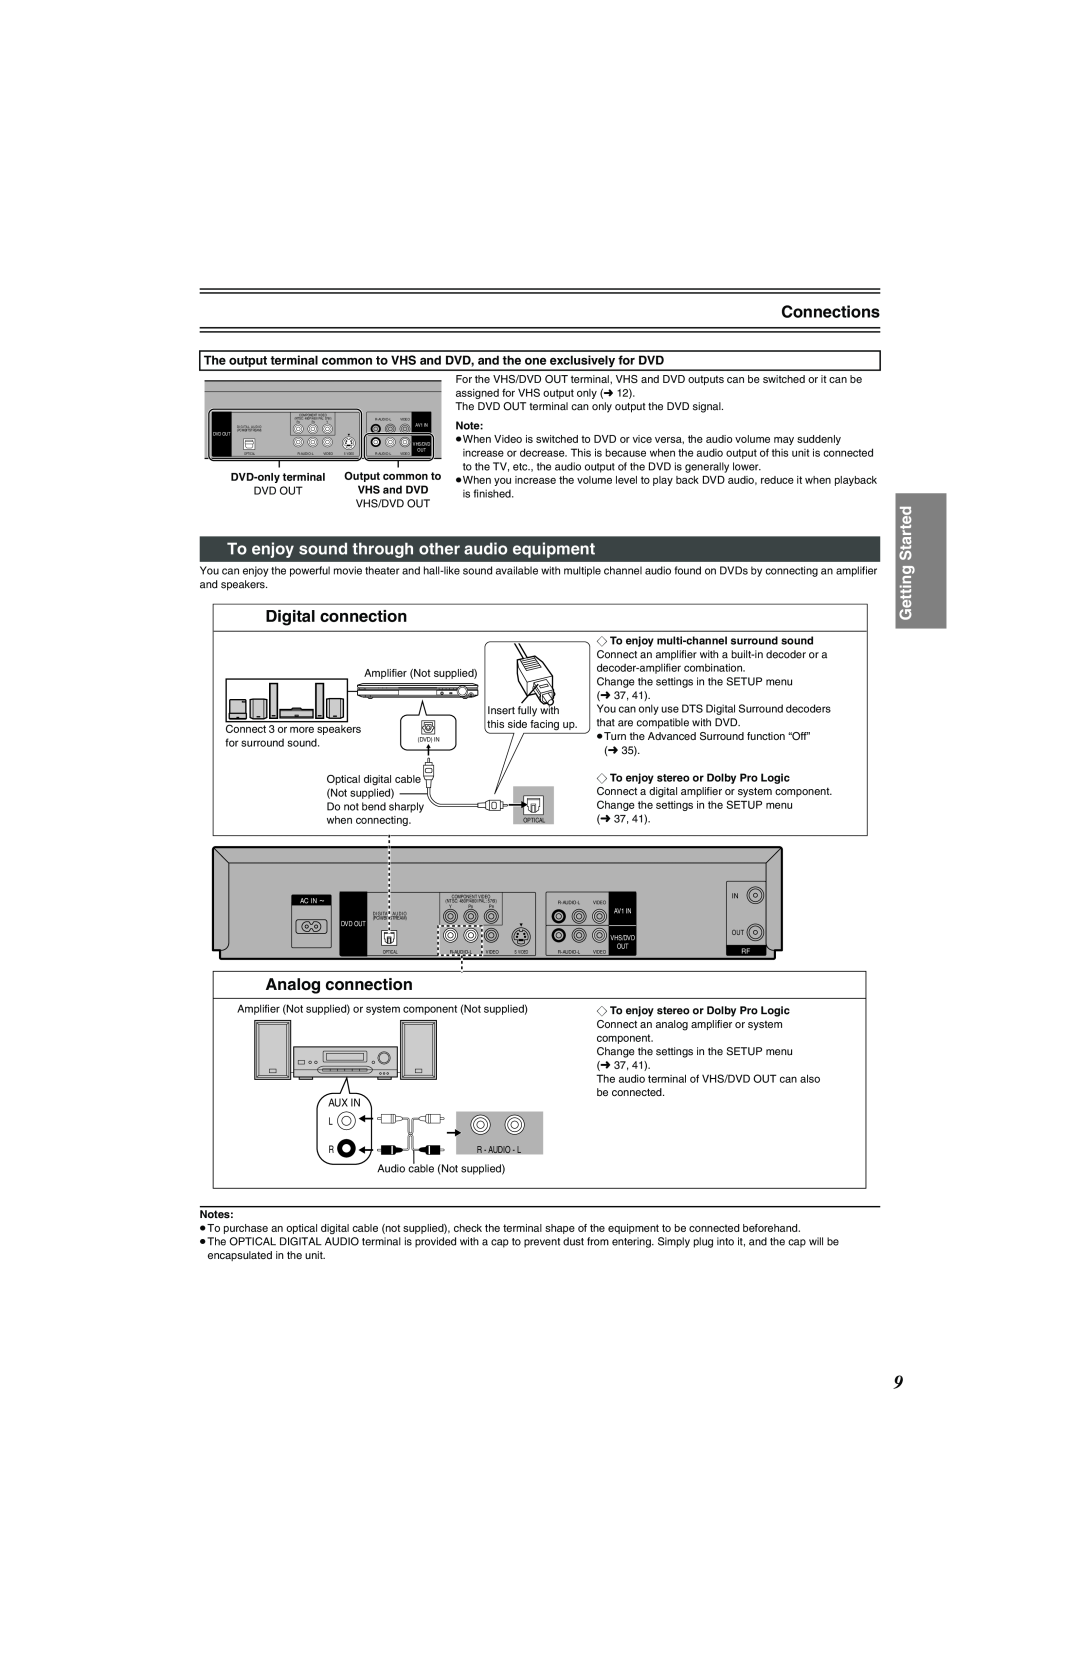 Panasonic NV-VP32 Series Connections, To enjoy sound through other audio equipment, Digital connection, Analog connection 